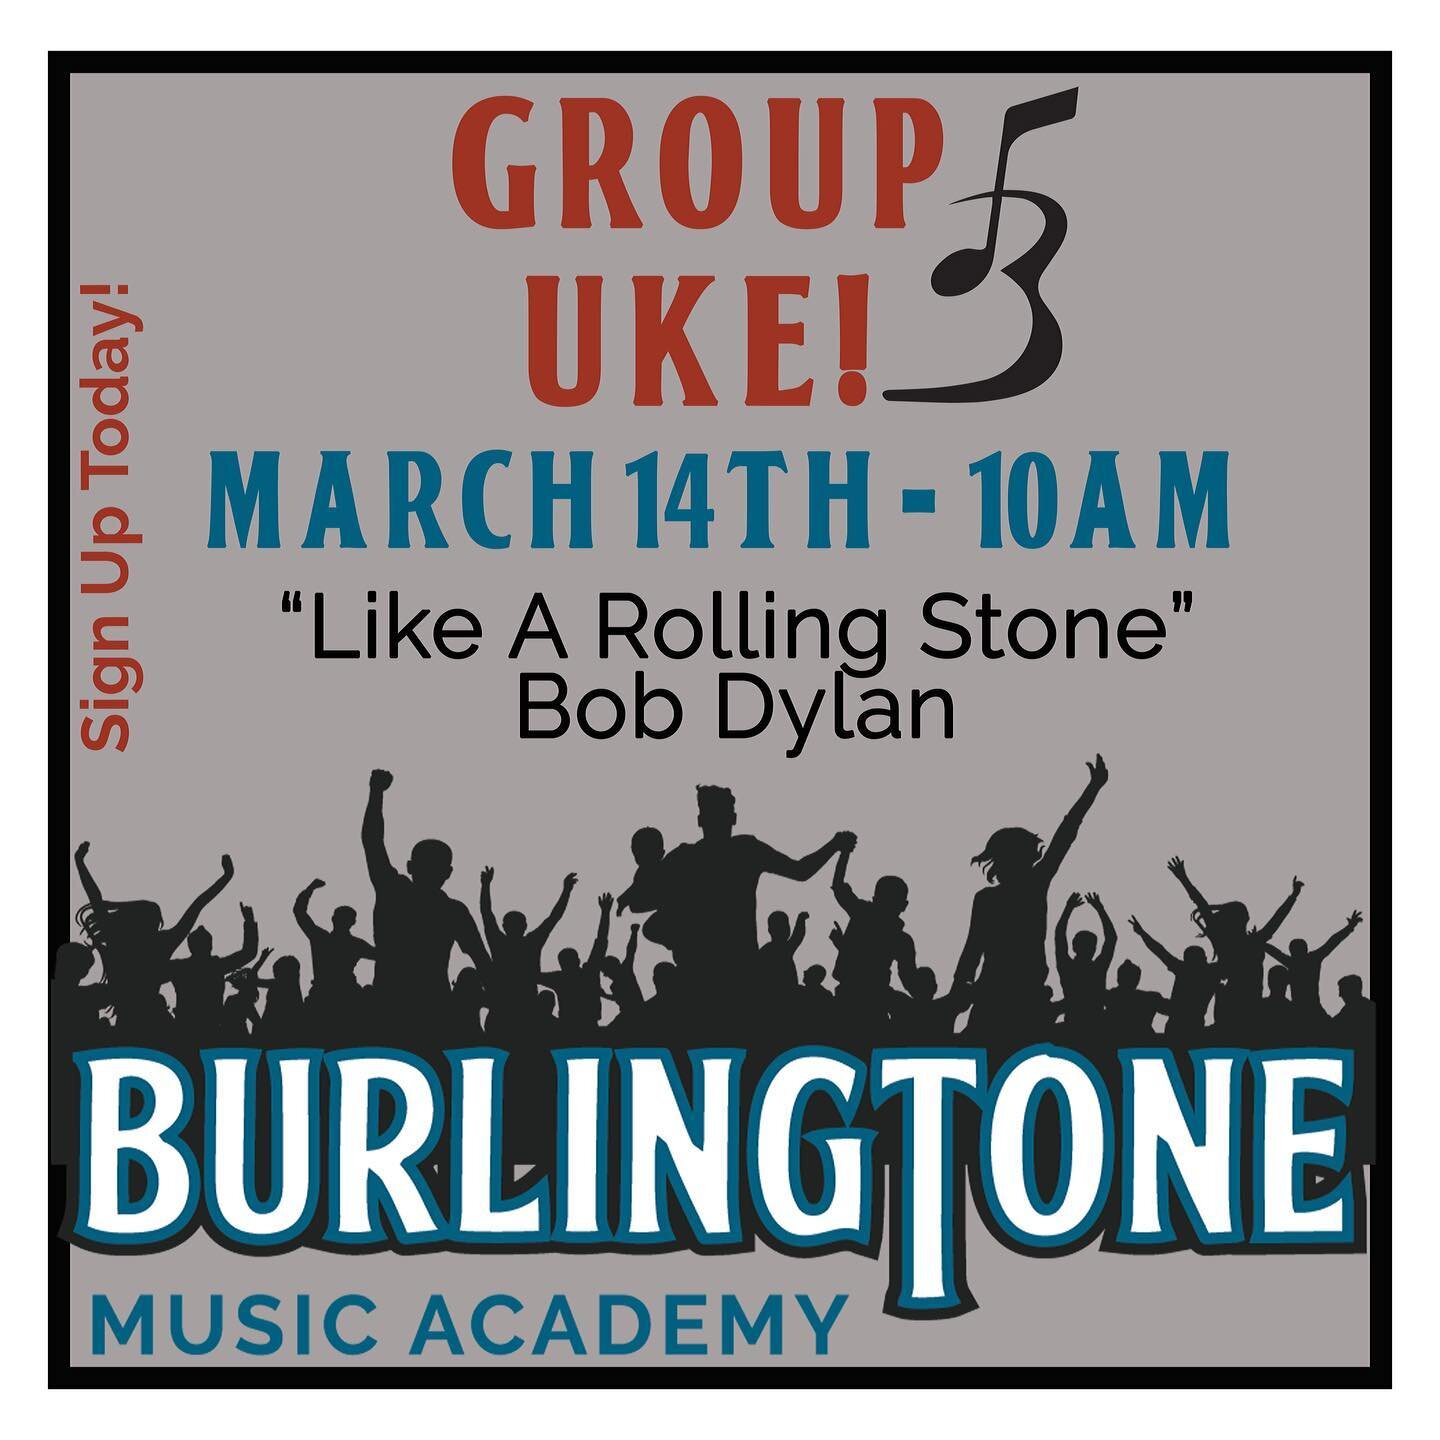 Tomorrow the class is going to read this great Dylan classic as a number chart!!
Don&rsquo;t miss it! (And don&rsquo;t forget to set your clocks forward! 😉)
See you all tomorrow @ 10am.

#groupukulelelessons #likearollingstone  #onlinemusiclessons #